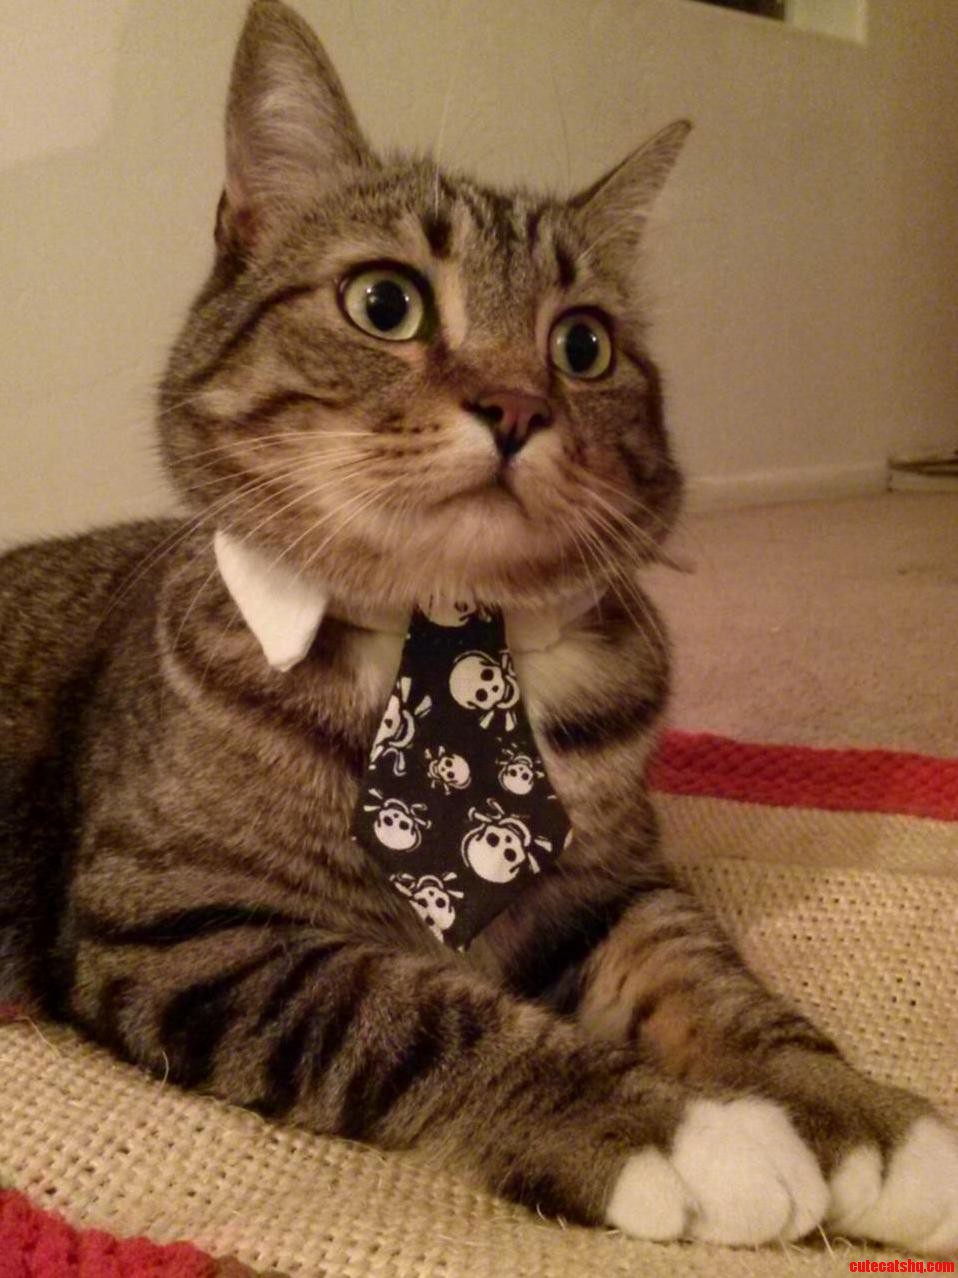 Not too thrilled with his tie.